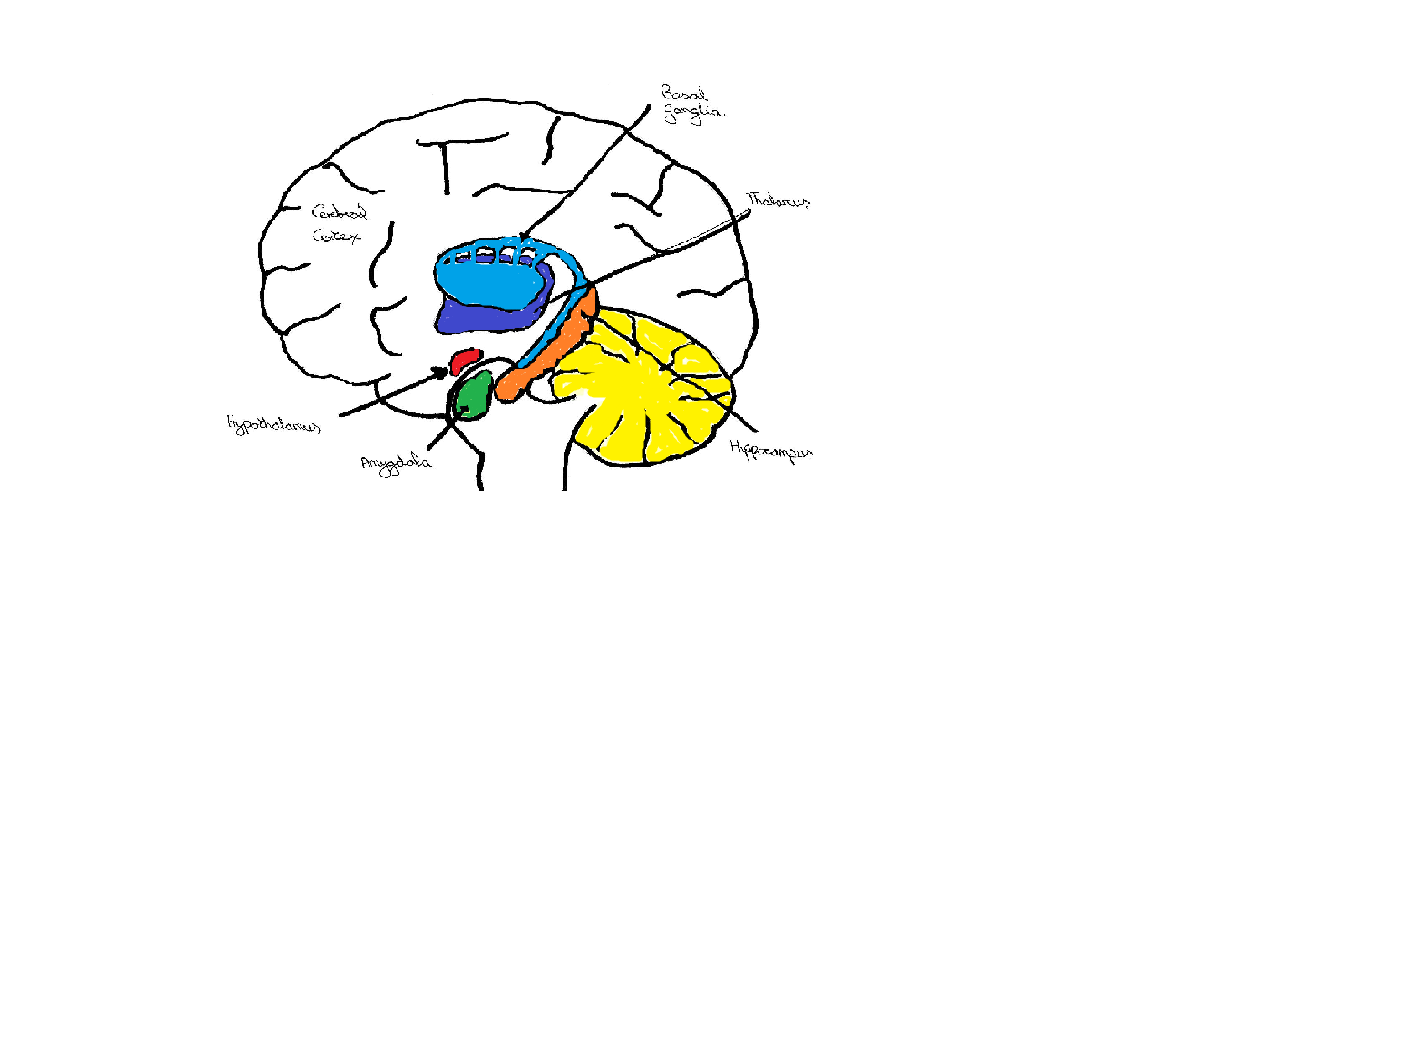 Subcortical brain structures